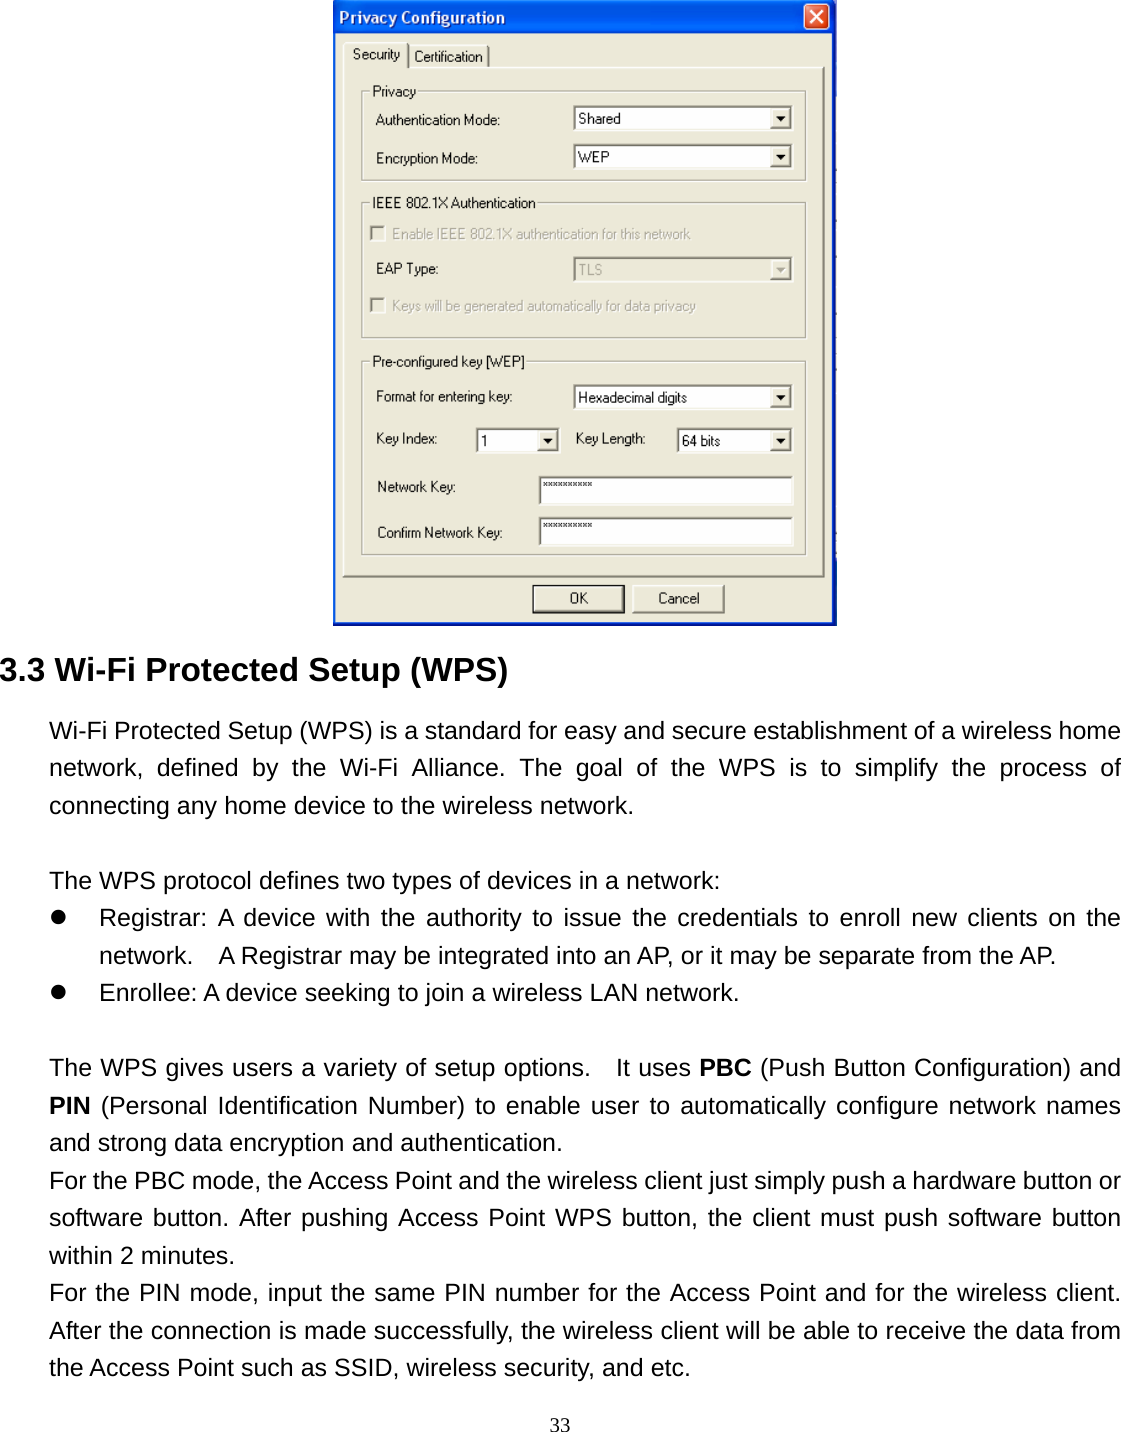  33  3.3 Wi-Fi Protected Setup (WPS) Wi-Fi Protected Setup (WPS) is a standard for easy and secure establishment of a wireless home network, defined by the Wi-Fi Alliance. The goal of the WPS is to simplify the process of connecting any home device to the wireless network.      The WPS protocol defines two types of devices in a network: z  Registrar: A device with the authority to issue the credentials to enroll new clients on the network.    A Registrar may be integrated into an AP, or it may be separate from the AP.   z  Enrollee: A device seeking to join a wireless LAN network.    The WPS gives users a variety of setup options.    It uses PBC (Push Button Configuration) and PIN (Personal Identification Number) to enable user to automatically configure network names and strong data encryption and authentication.   For the PBC mode, the Access Point and the wireless client just simply push a hardware button or software button. After pushing Access Point WPS button, the client must push software button within 2 minutes. For the PIN mode, input the same PIN number for the Access Point and for the wireless client. After the connection is made successfully, the wireless client will be able to receive the data from the Access Point such as SSID, wireless security, and etc. 